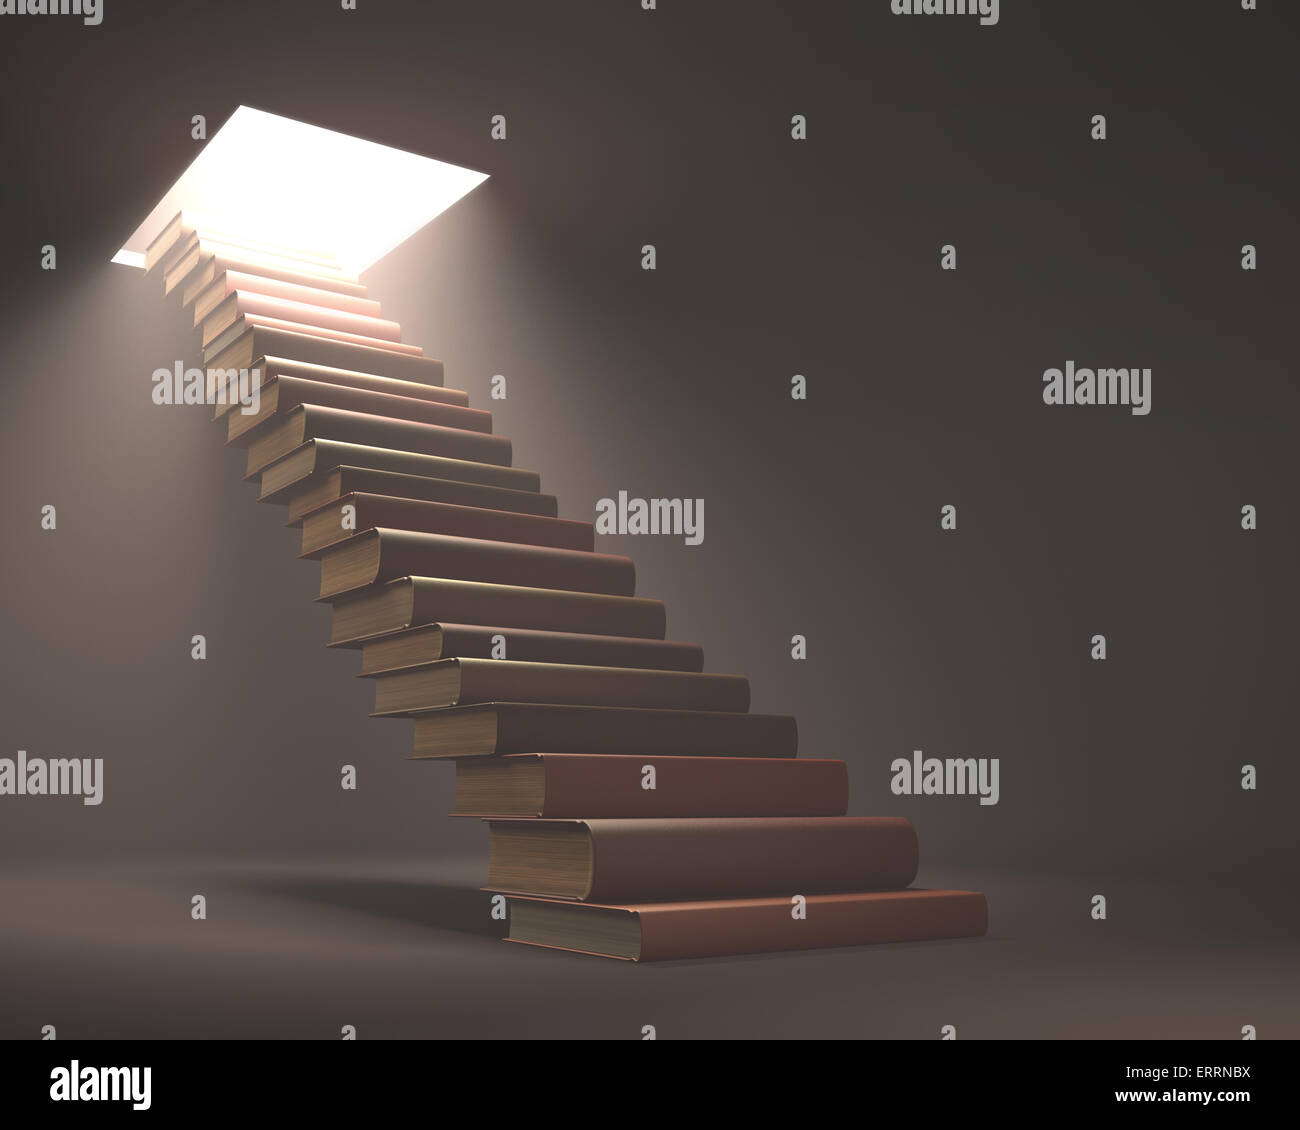 Books stacked ladder shaped on a concept of knowledge and growth. Stock Photo